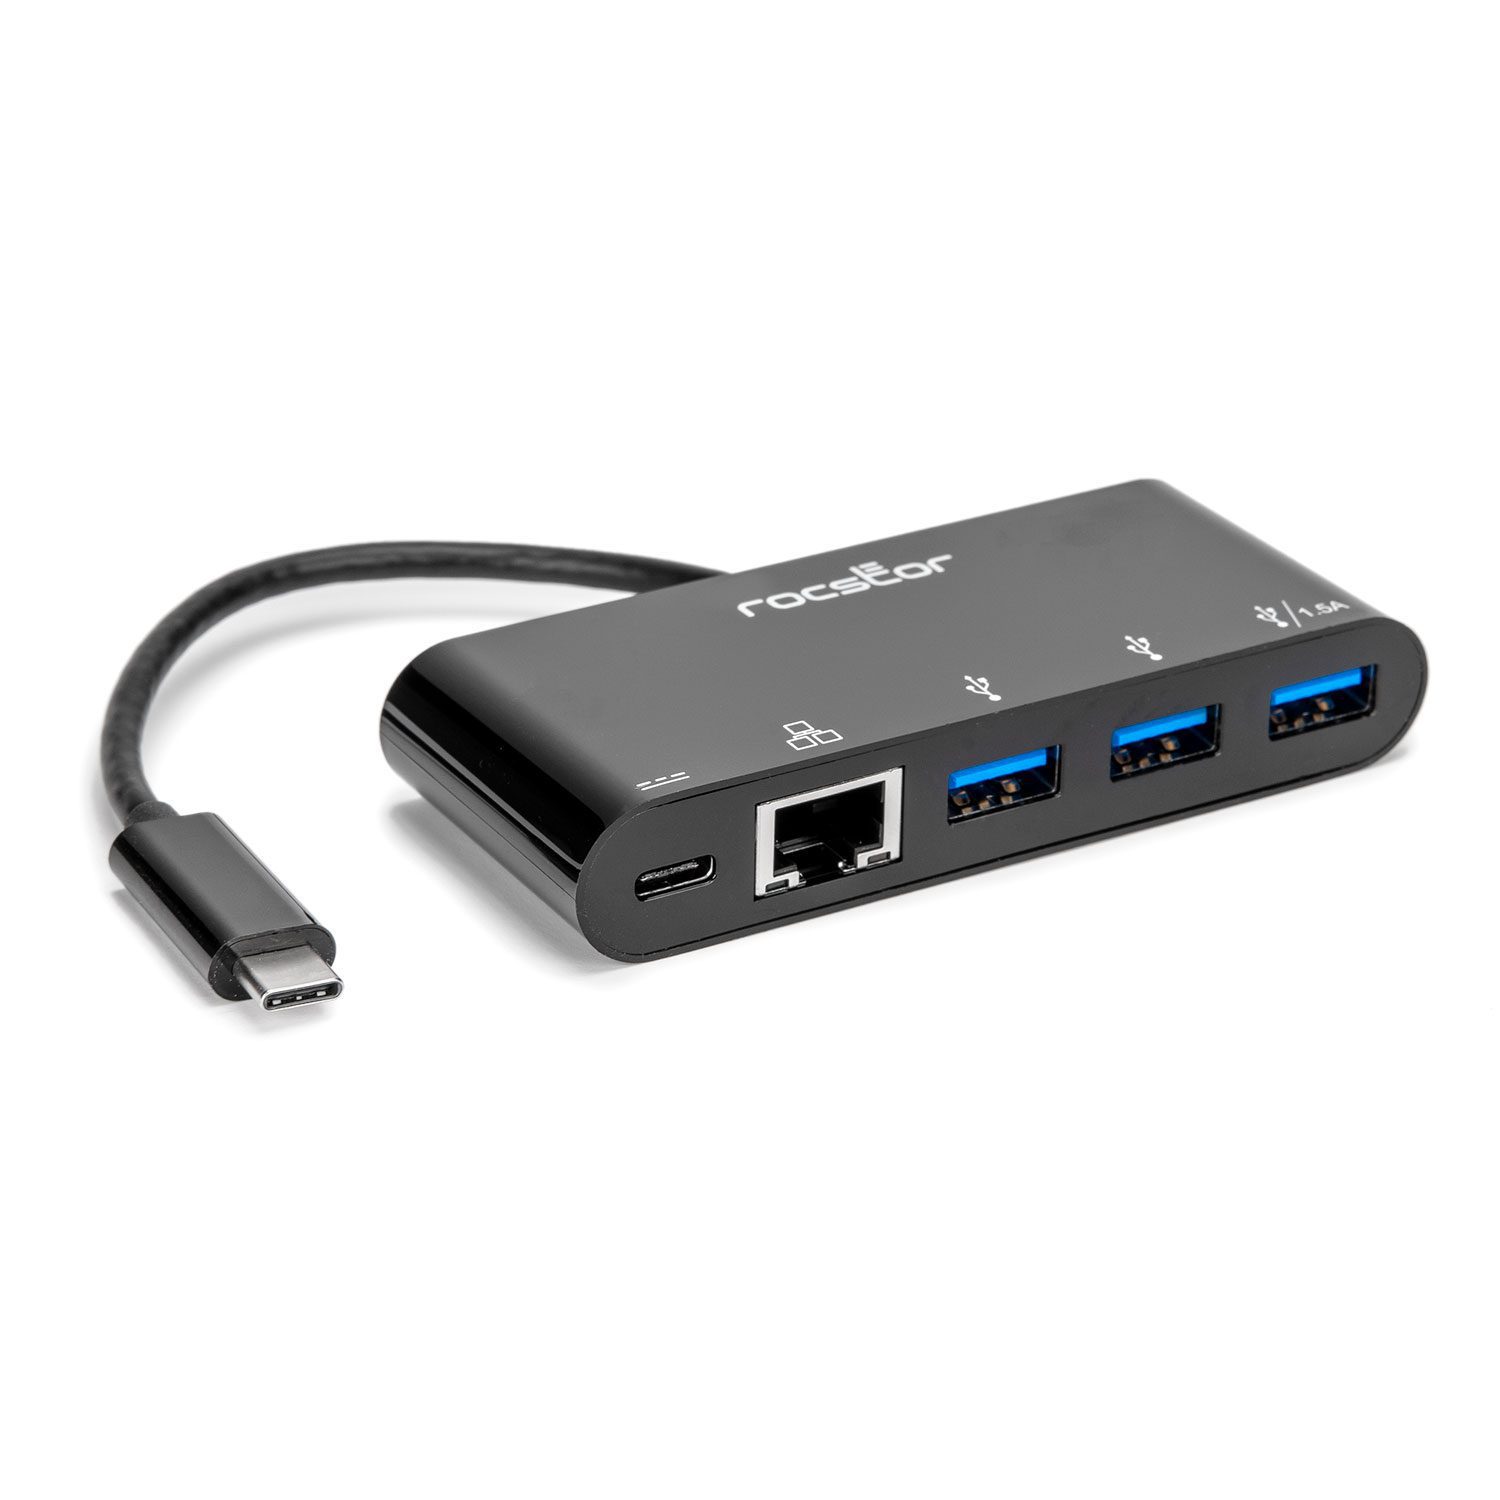 USB-C Multiport Adapter with HDMI - USB 3.0 Port - 60W PD - Black